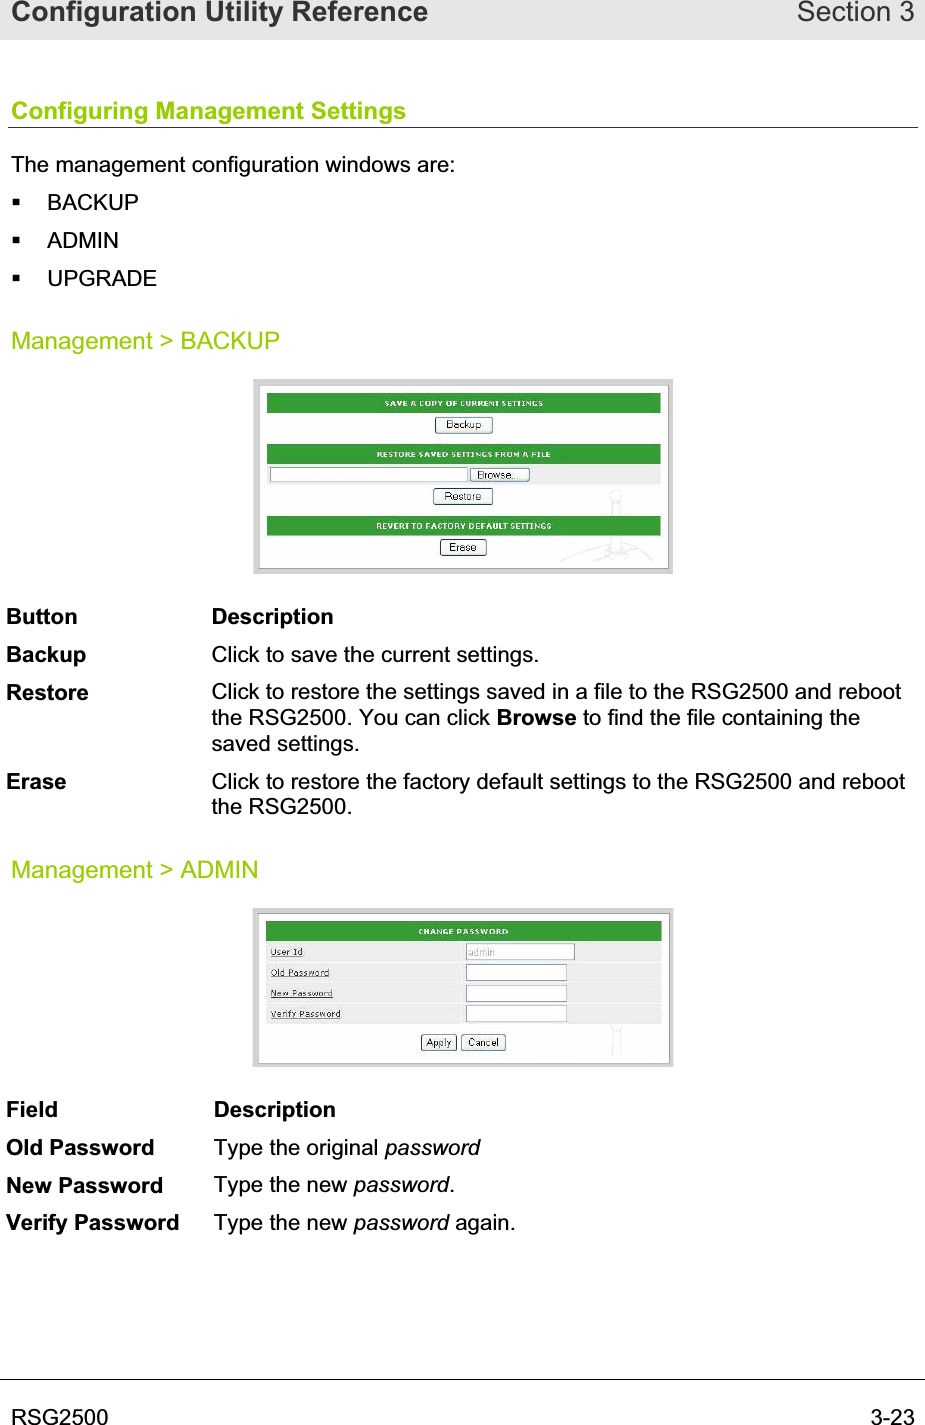 Configuration Utility Reference Section 3RSG2500  3-23Configuring Management Settings The management configuration windows are:  BACKUP  ADMIN  UPGRADE Management &gt; BACKUP Button Description Backup Click to save the current settings. Restore Click to restore the settings saved in a file to the RSG2500 and reboot the RSG2500. You can click Browse to find the file containing the saved settings. Erase Click to restore the factory default settings to the RSG2500 and reboot the RSG2500. Management &gt; ADMIN Field Description Old Password  Type the original passwordNew Password  Type the new password.Verify Password  Type the new password again. 